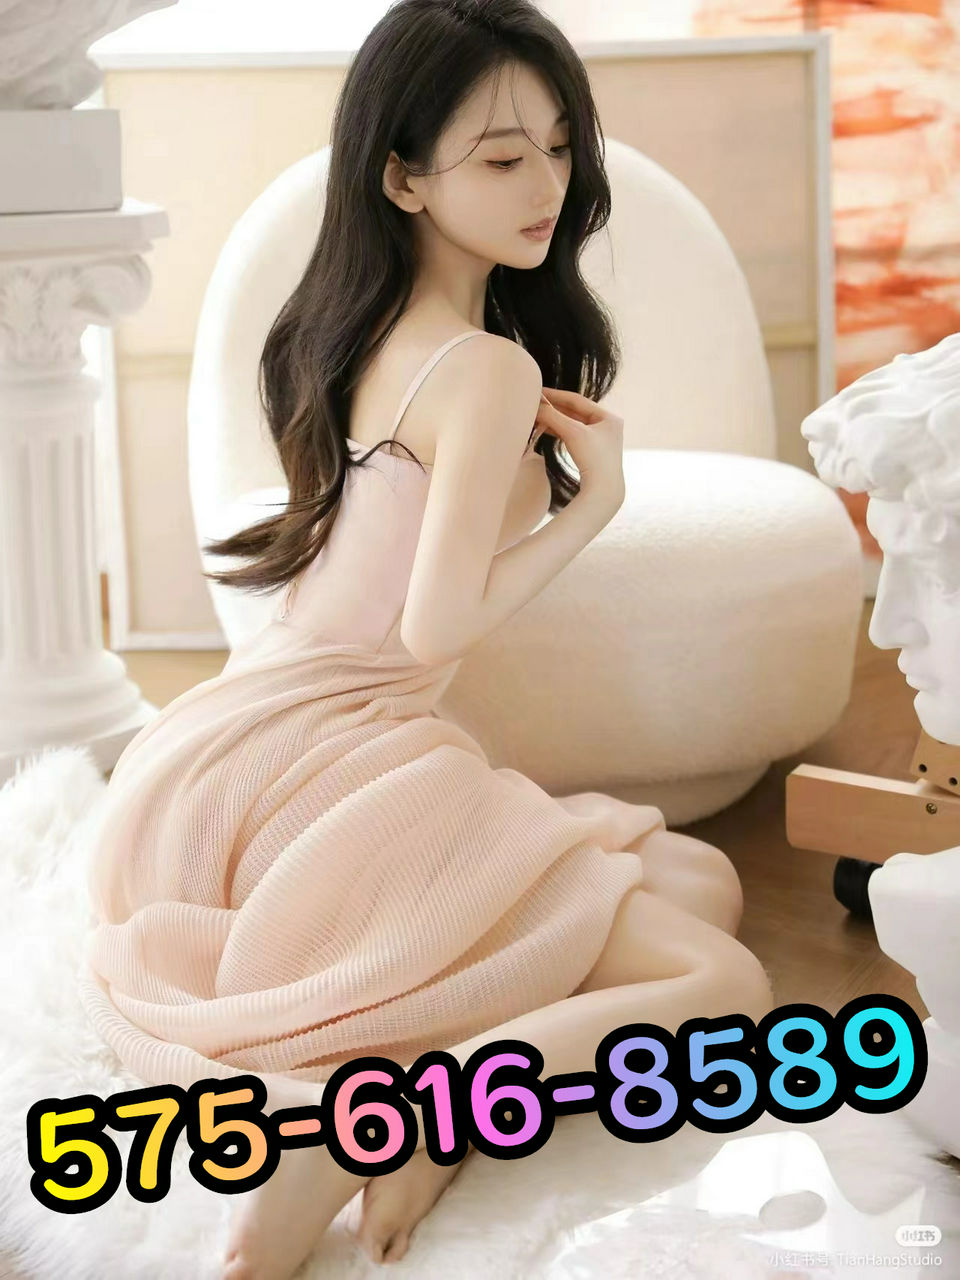 Escorts New Mexico 🔴🔴🔴🌈🌈Grand Opening 🟪🌸🌸🟪🟪🌸🌸🟪 sexy girls 🟪🌸🌸🟪VIP Top Service🌈🌈🔴🔴🔴